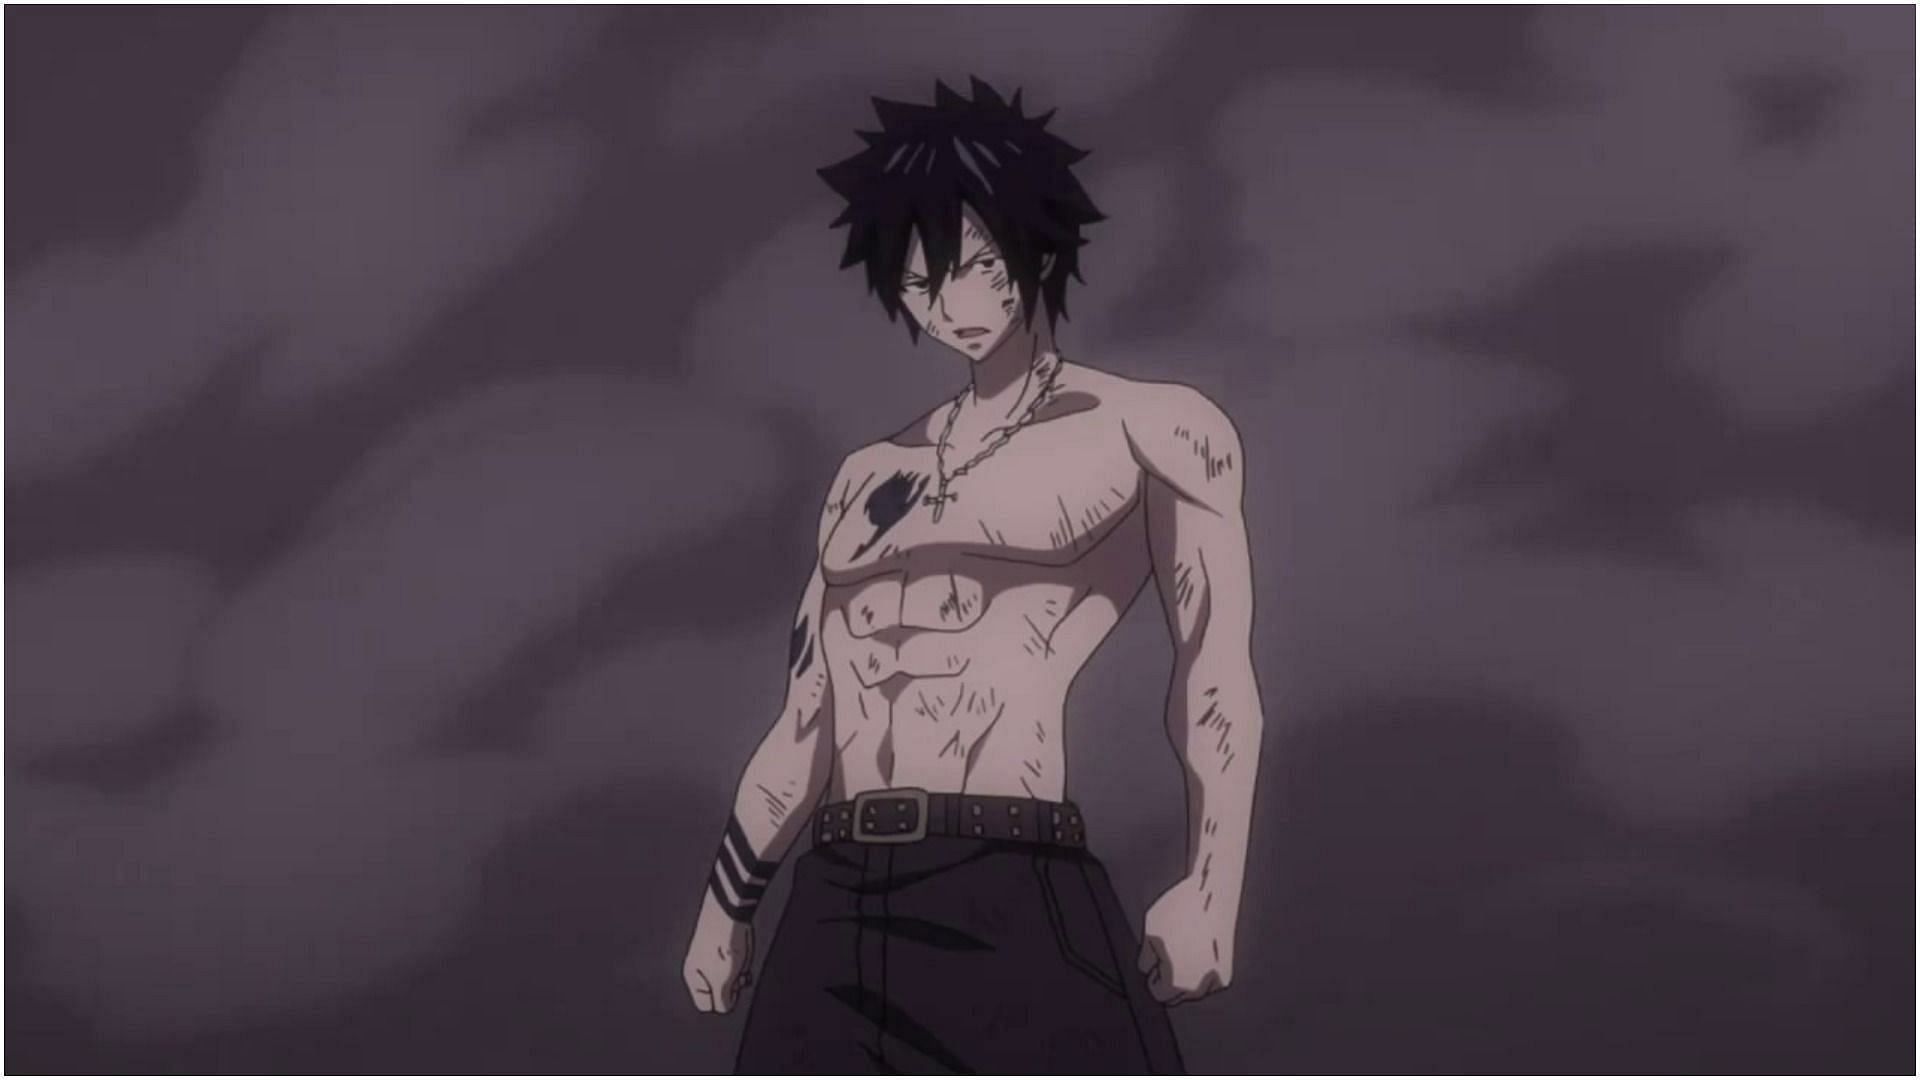 Gray Fullbuster as shown in the anime (Image via A-1 Pictures)